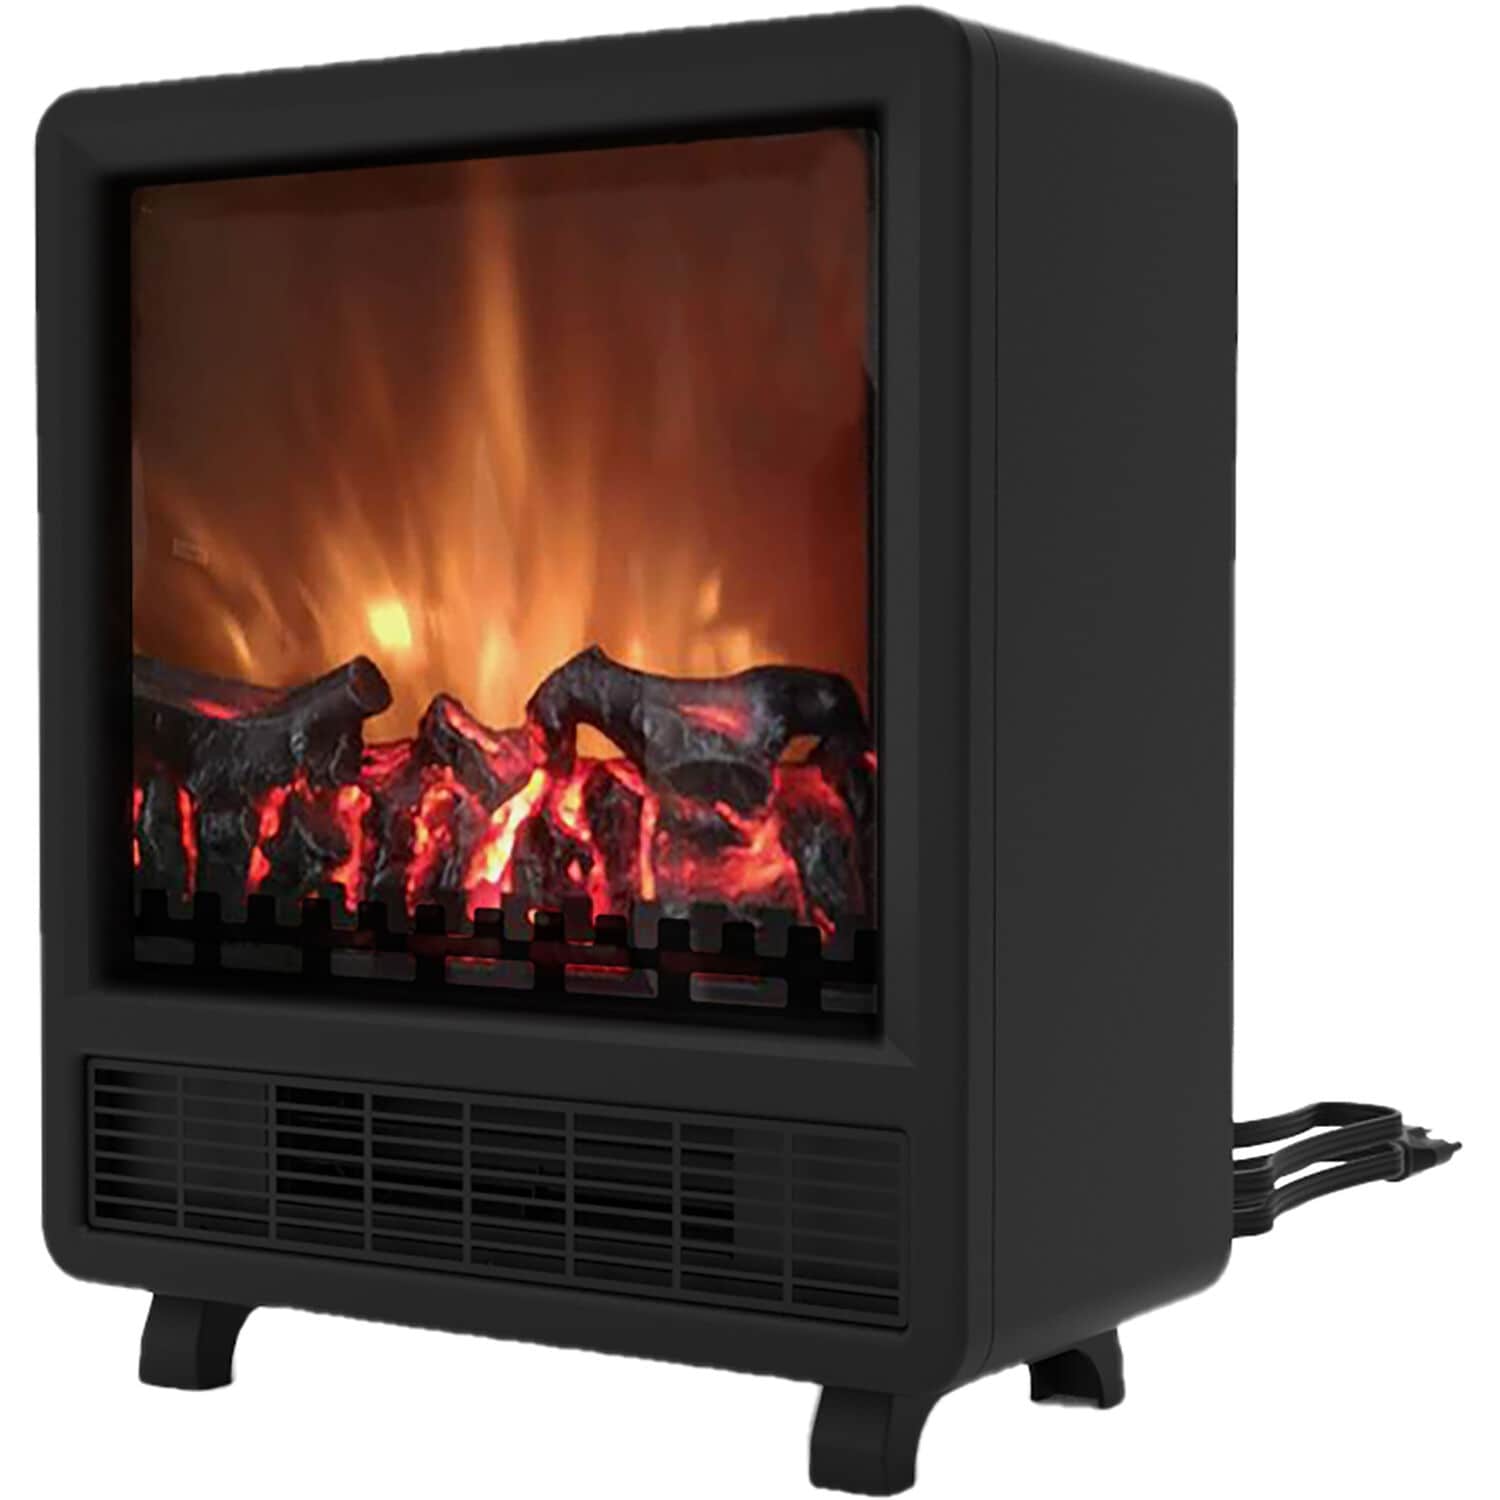 Hanover Fireside 17.8-In Freestanding 4606 BTU Electric Fireplace with Wood Log Display, Black - 17.8 Inch